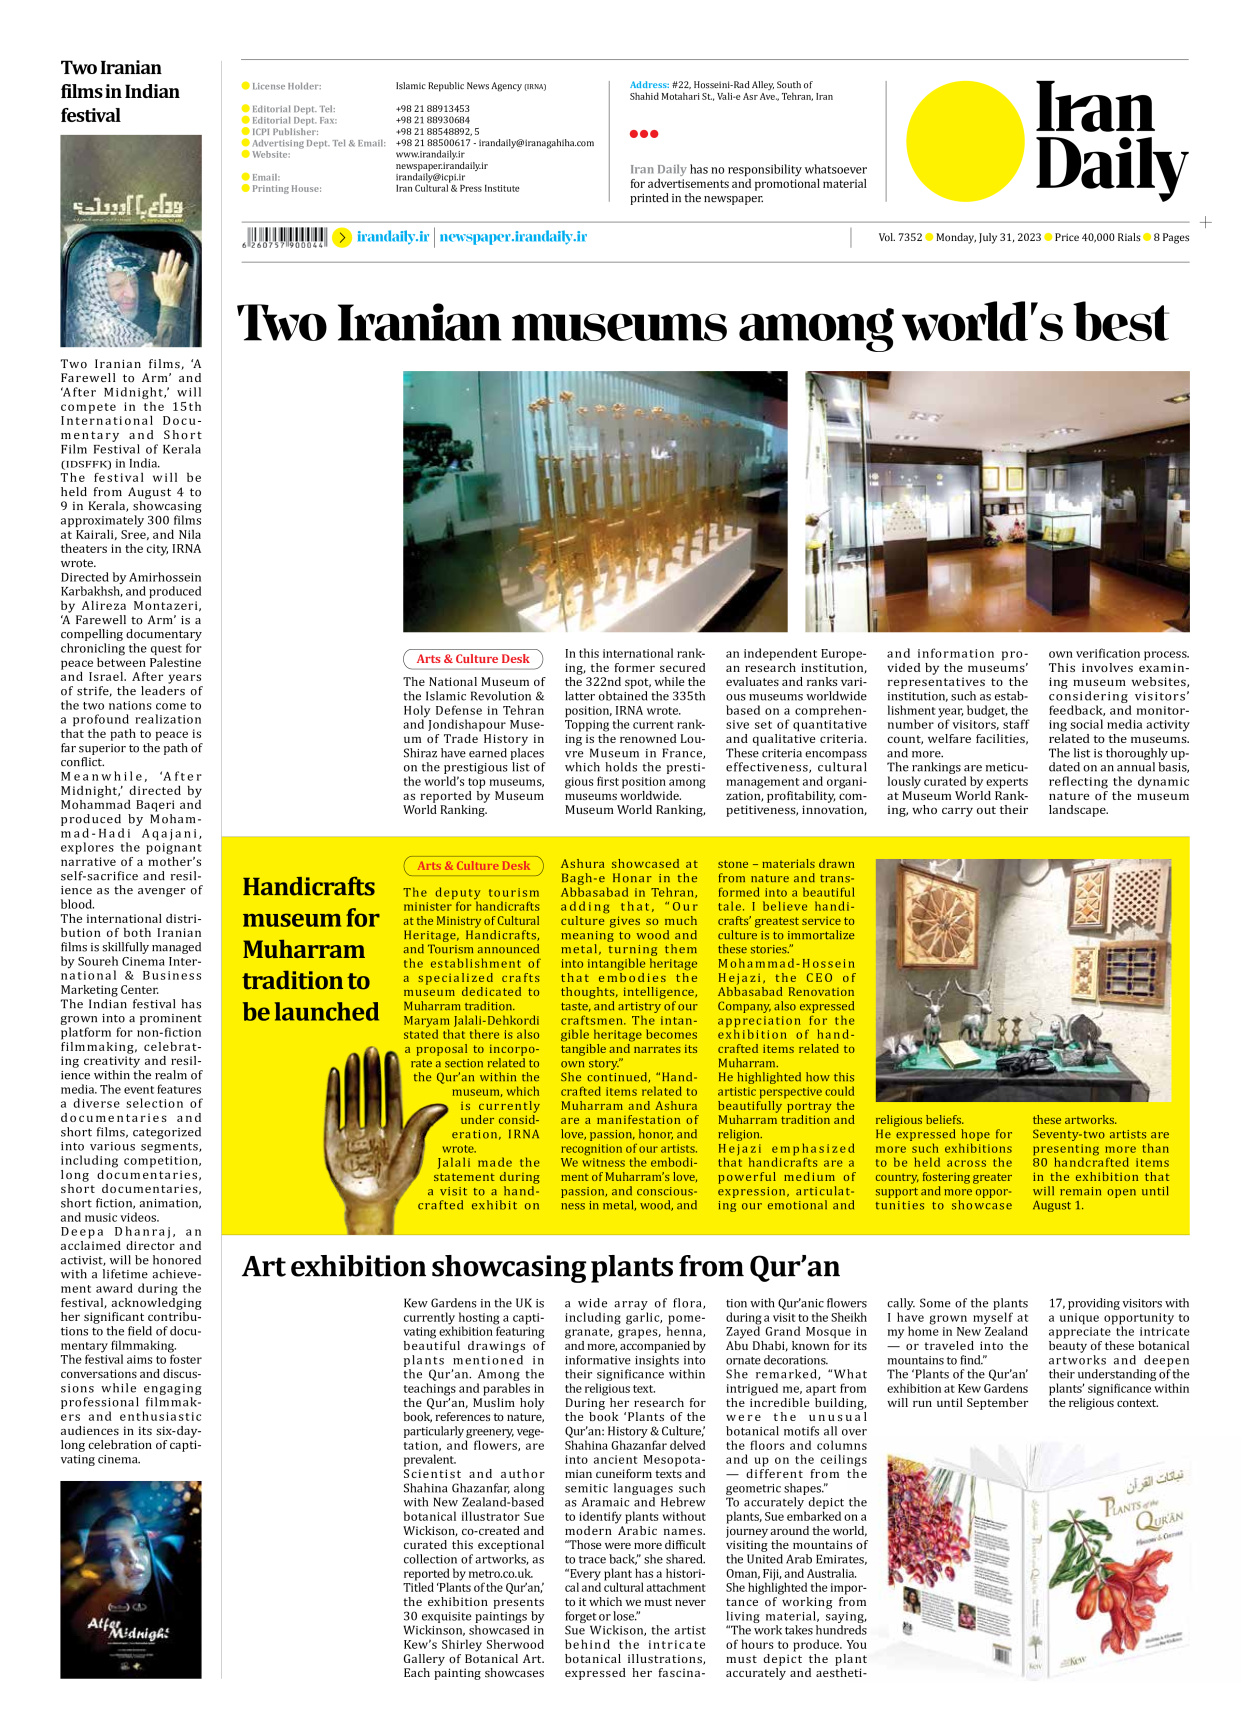 Iran Daily - Number Seven Thousand Three Hundred and Fifty Two - 31 July 2023 - Page 8